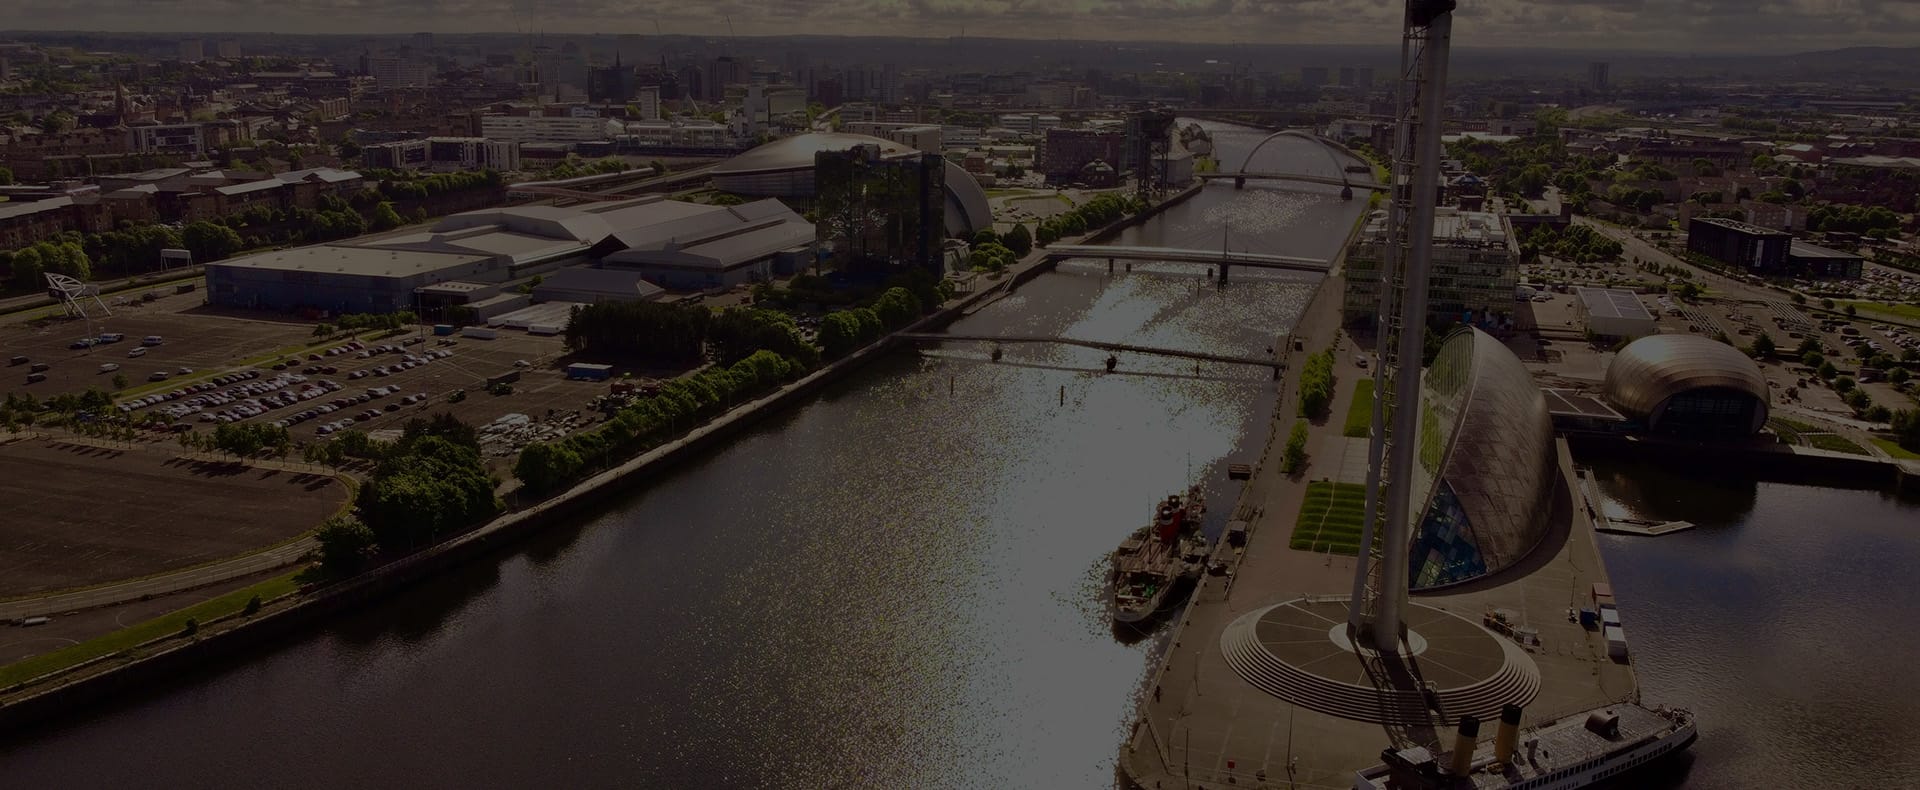 Aerial view of the River Clyde in Glasgow with Science City, other buildings, and bridges